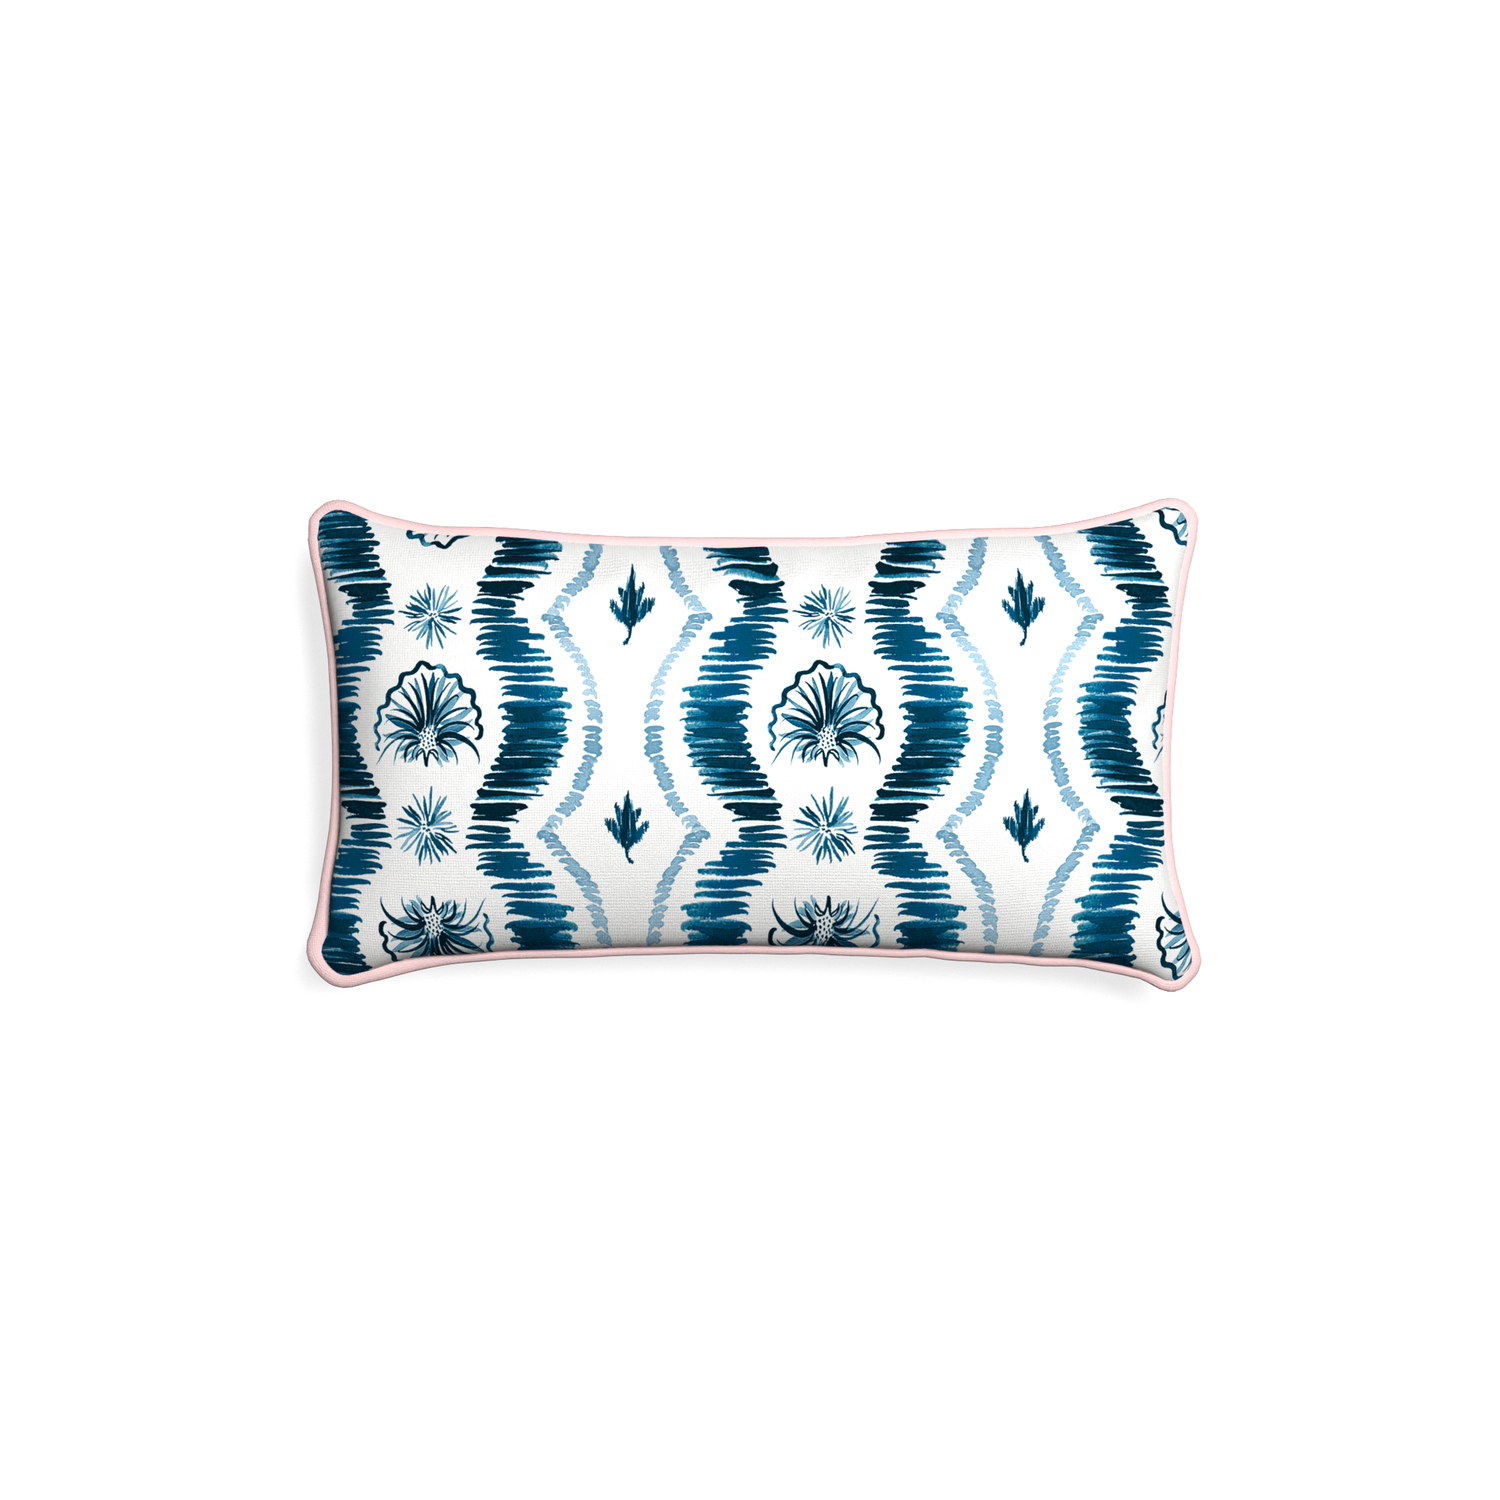 Petite-lumbar alice custom blue ikatpillow with petal piping on white background